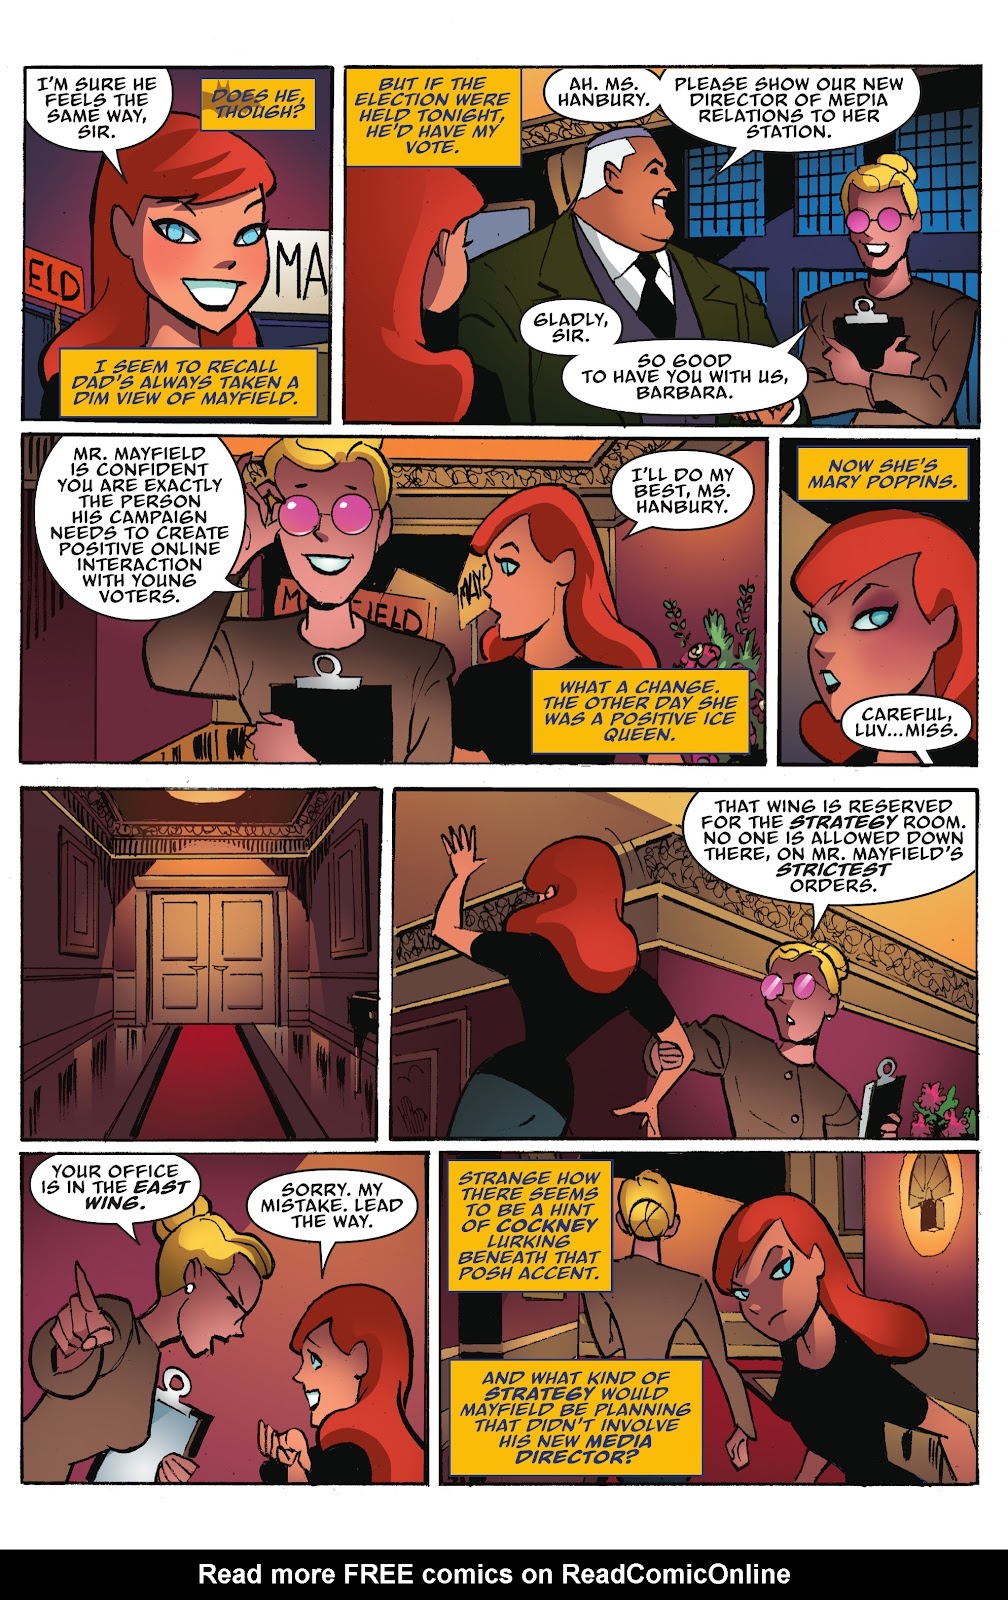 Batman: The Adventures Continue: Season Two issue 6 - Page 18